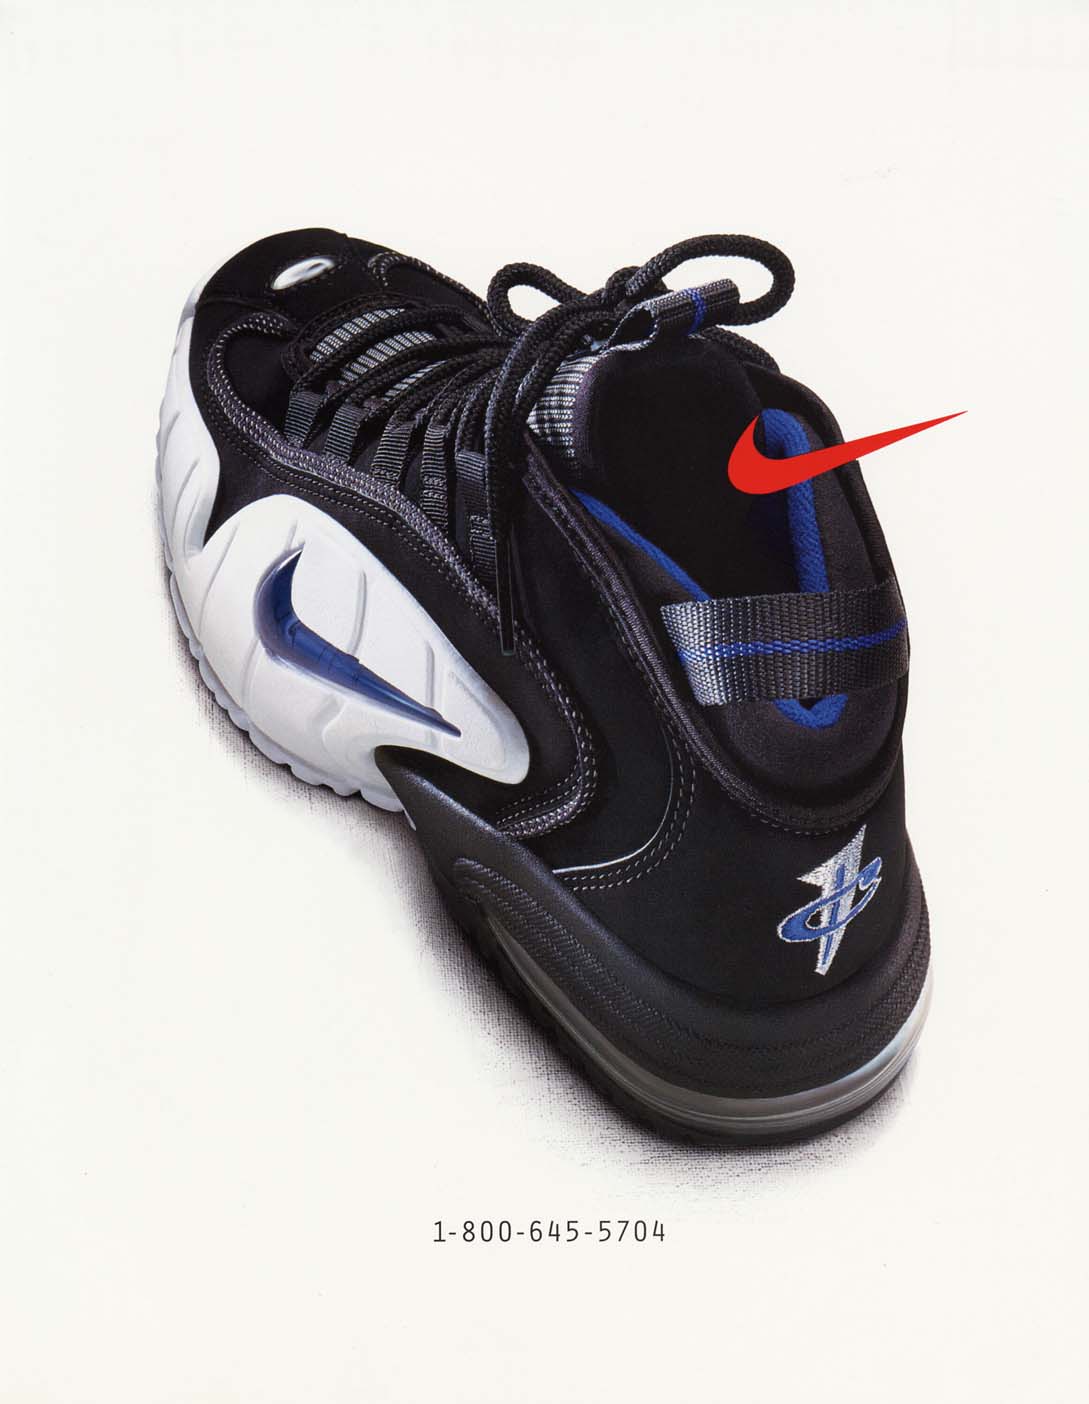 AIR_PENNY_HOLIDAY_PRODUCT_LEADERSHIP-pxy_2584_2184_12520